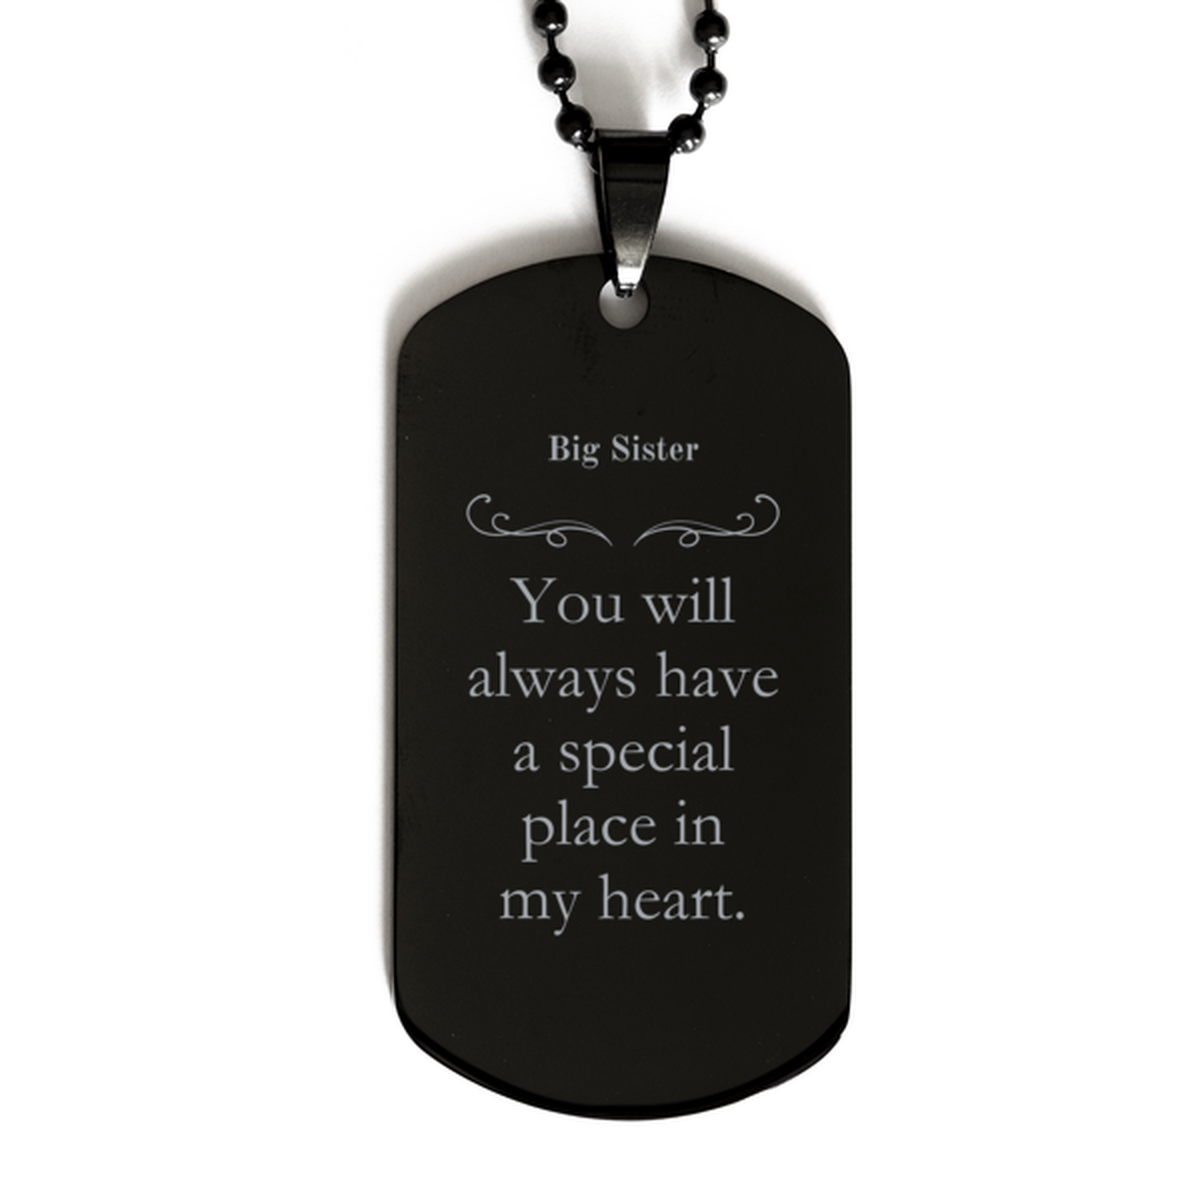 Big Sister Engraved Black Dog Tag - You Will Always Have a Special Place in My Heart - Unique Gift for Birthday, Christmas, Graduation - Niche Big Sister Confidence Hope Inspirational